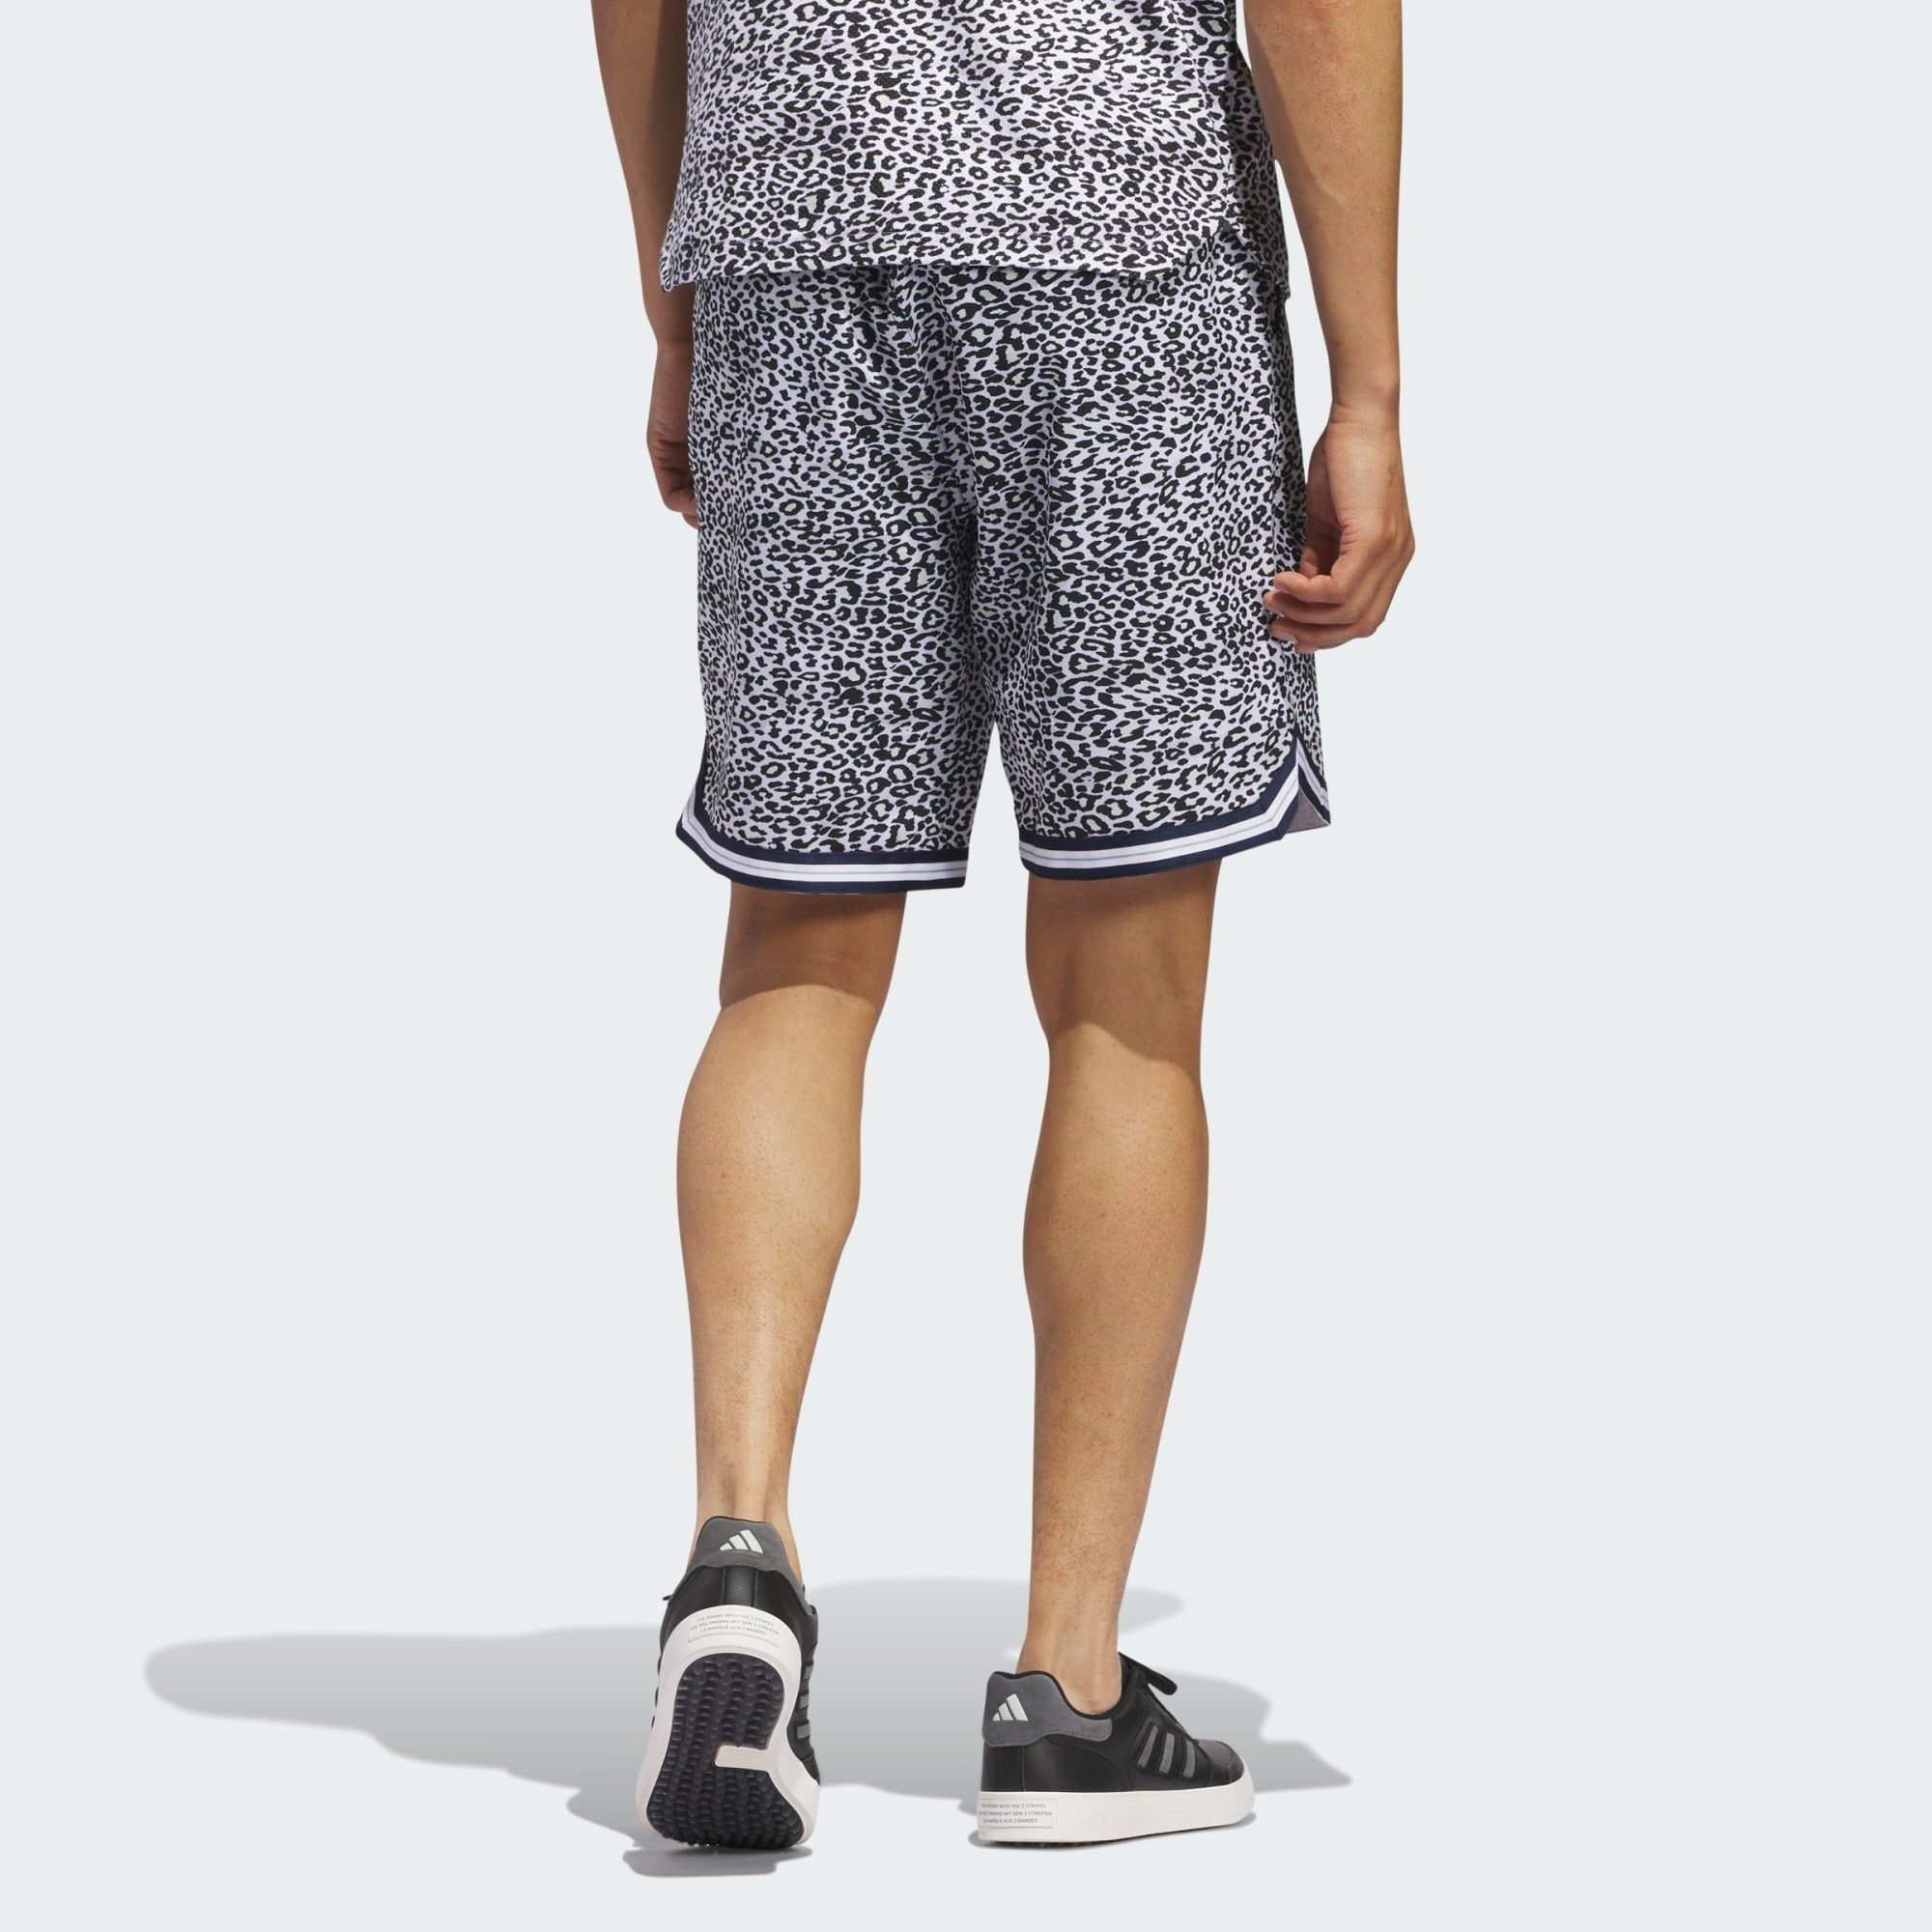 PRINTED Performance Funktionsshorts adidas ADICROSS DELIVERY SHORTS